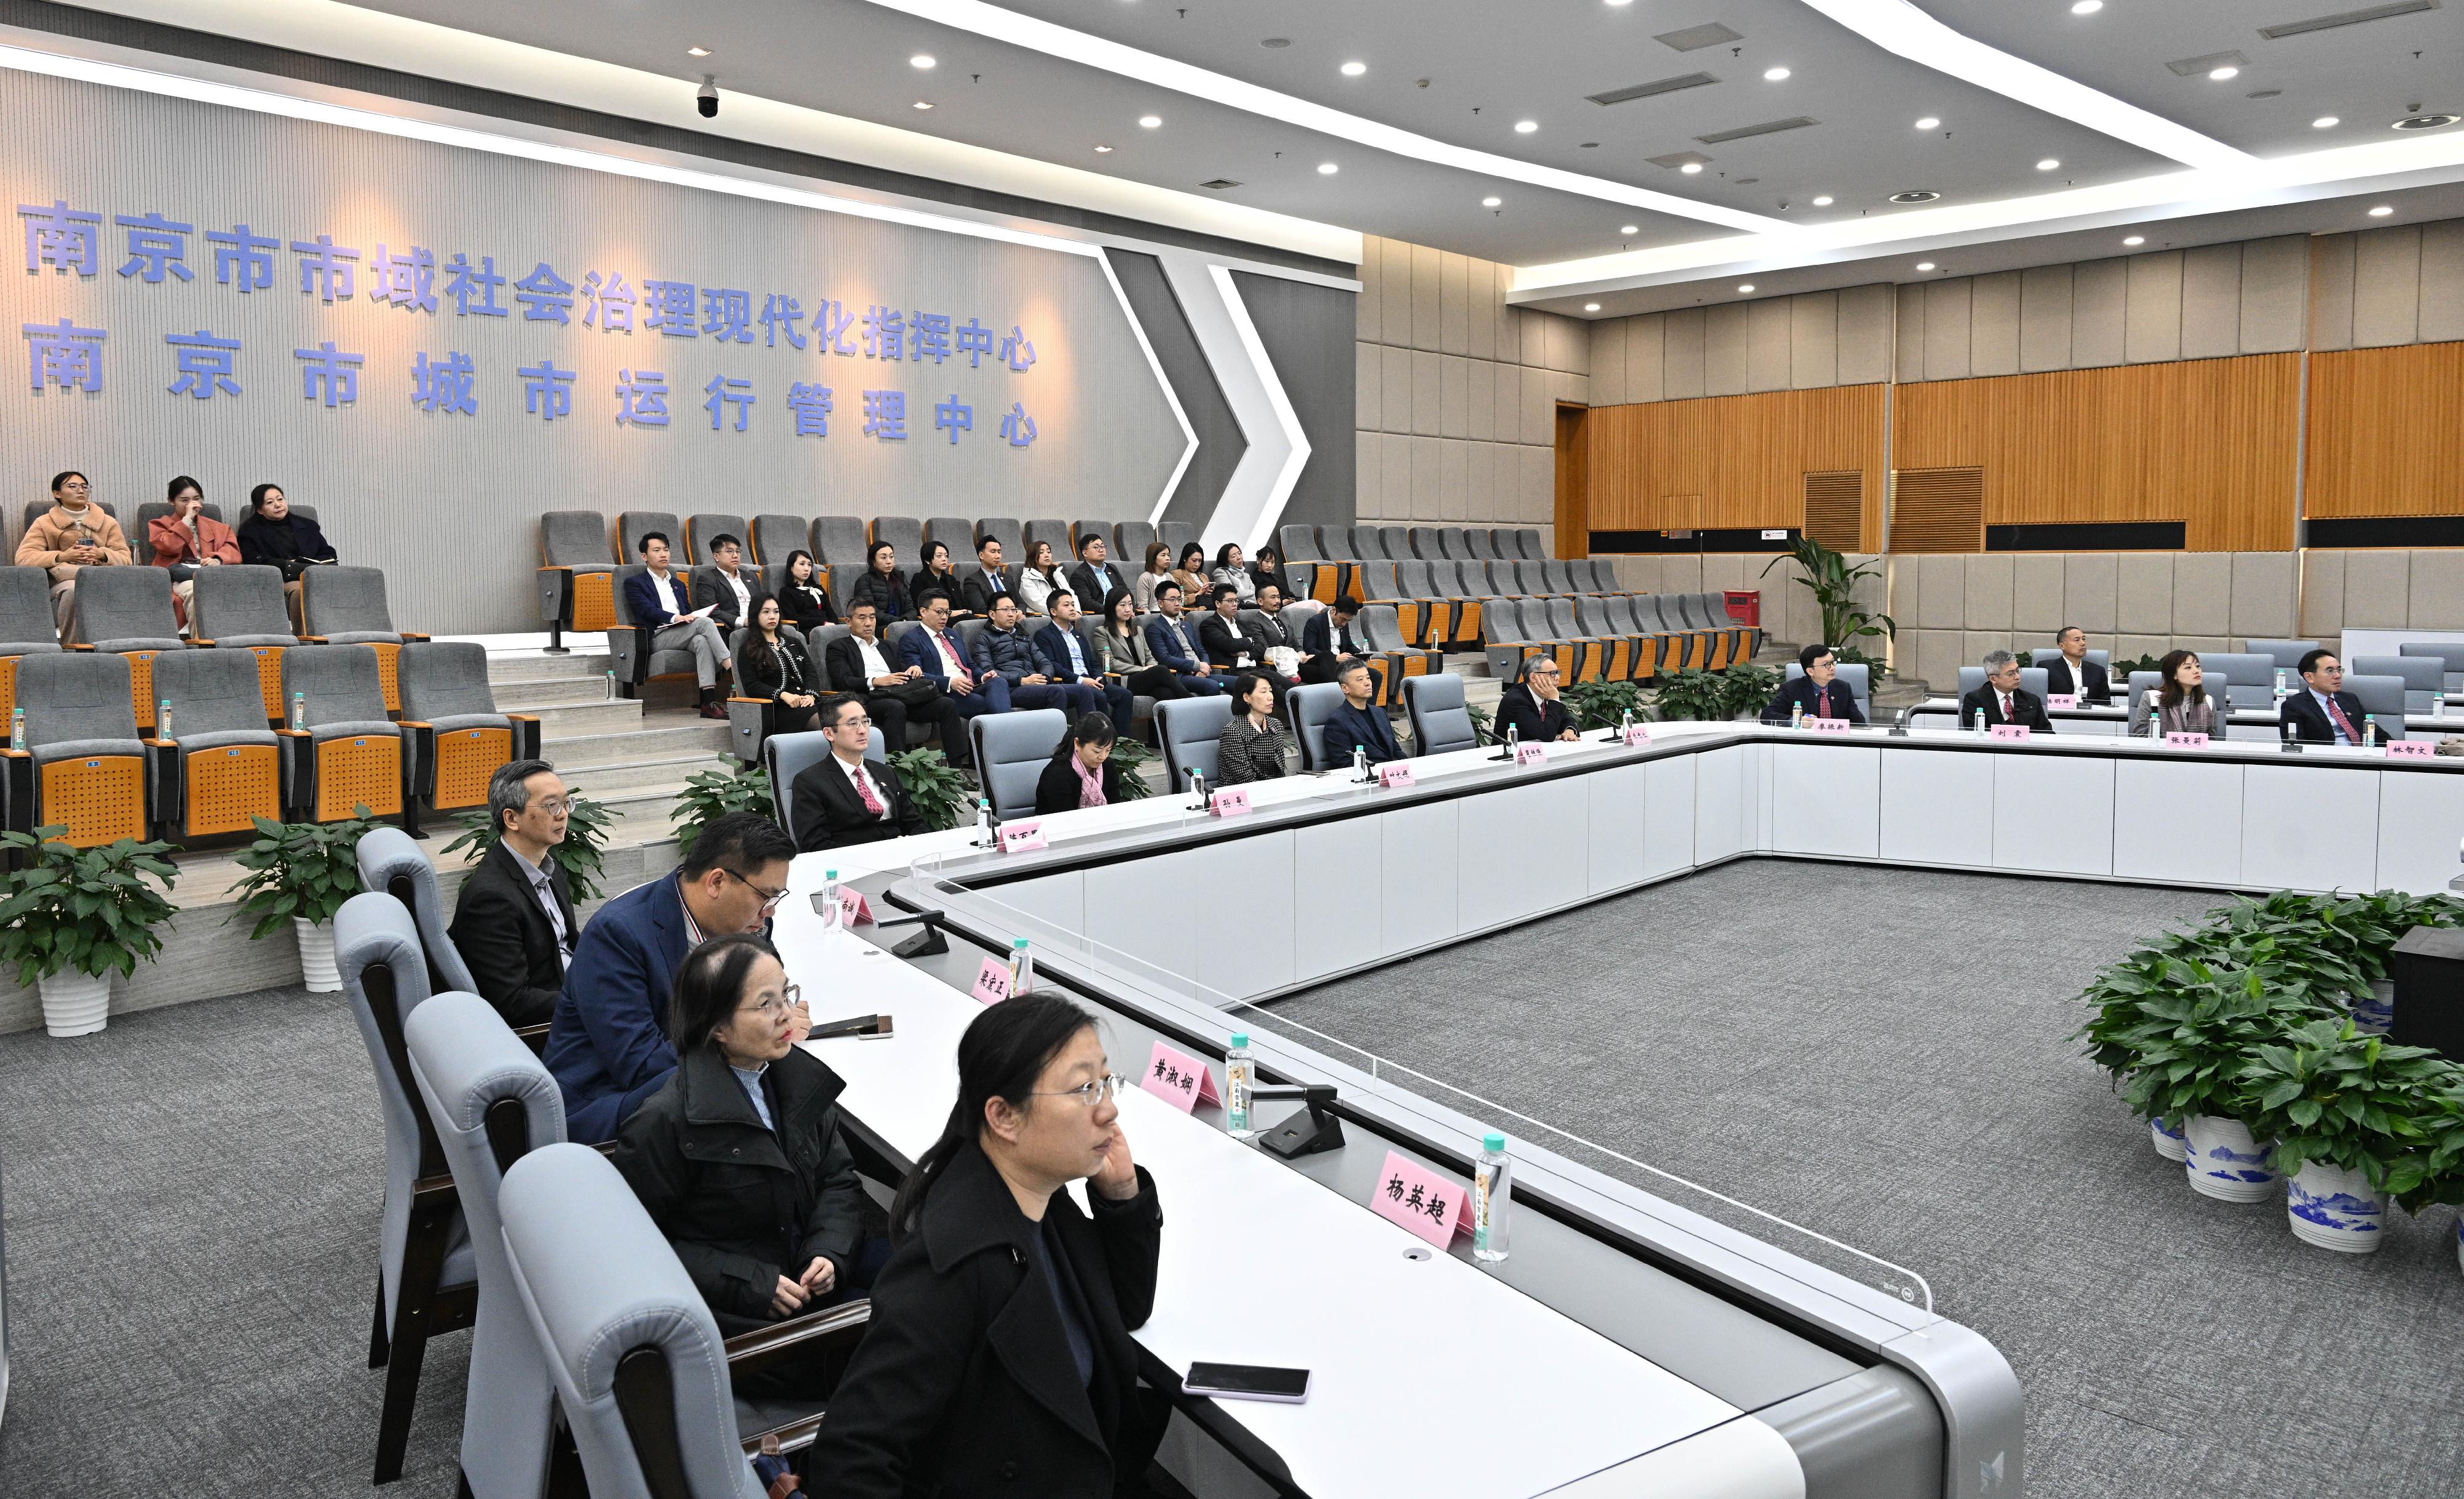 The delegation of politically appointed officials on a national studies programme and duty visit today (November 24) visited the Nanjing smart city centre.